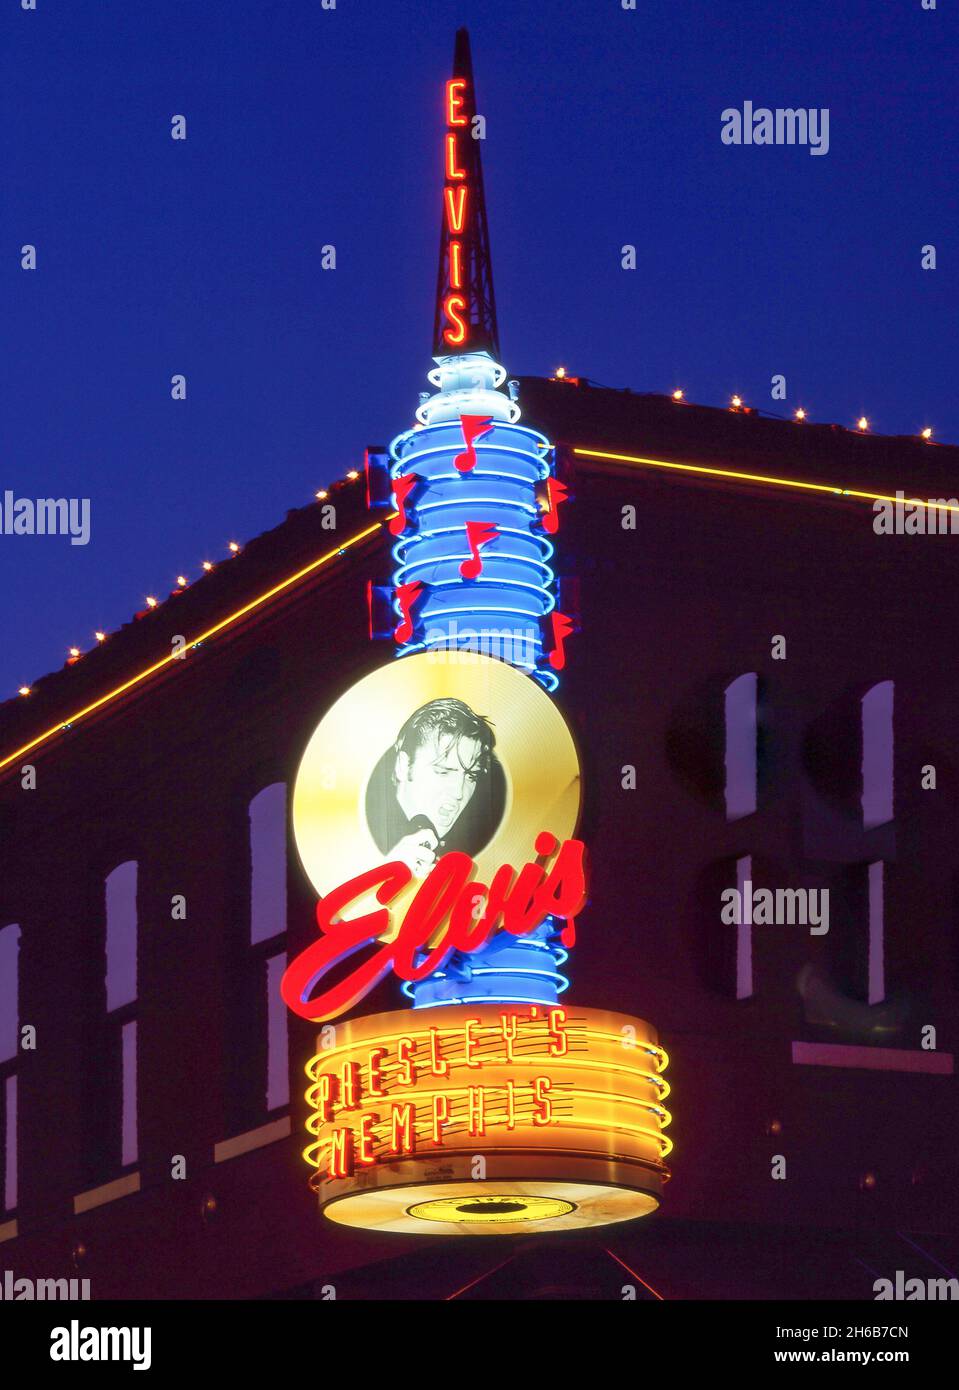 Elvis Presley Restaurant sign at dusk, Beale Street, Beale Street District, Memphis, Tennessee, United States of America Stock Photo